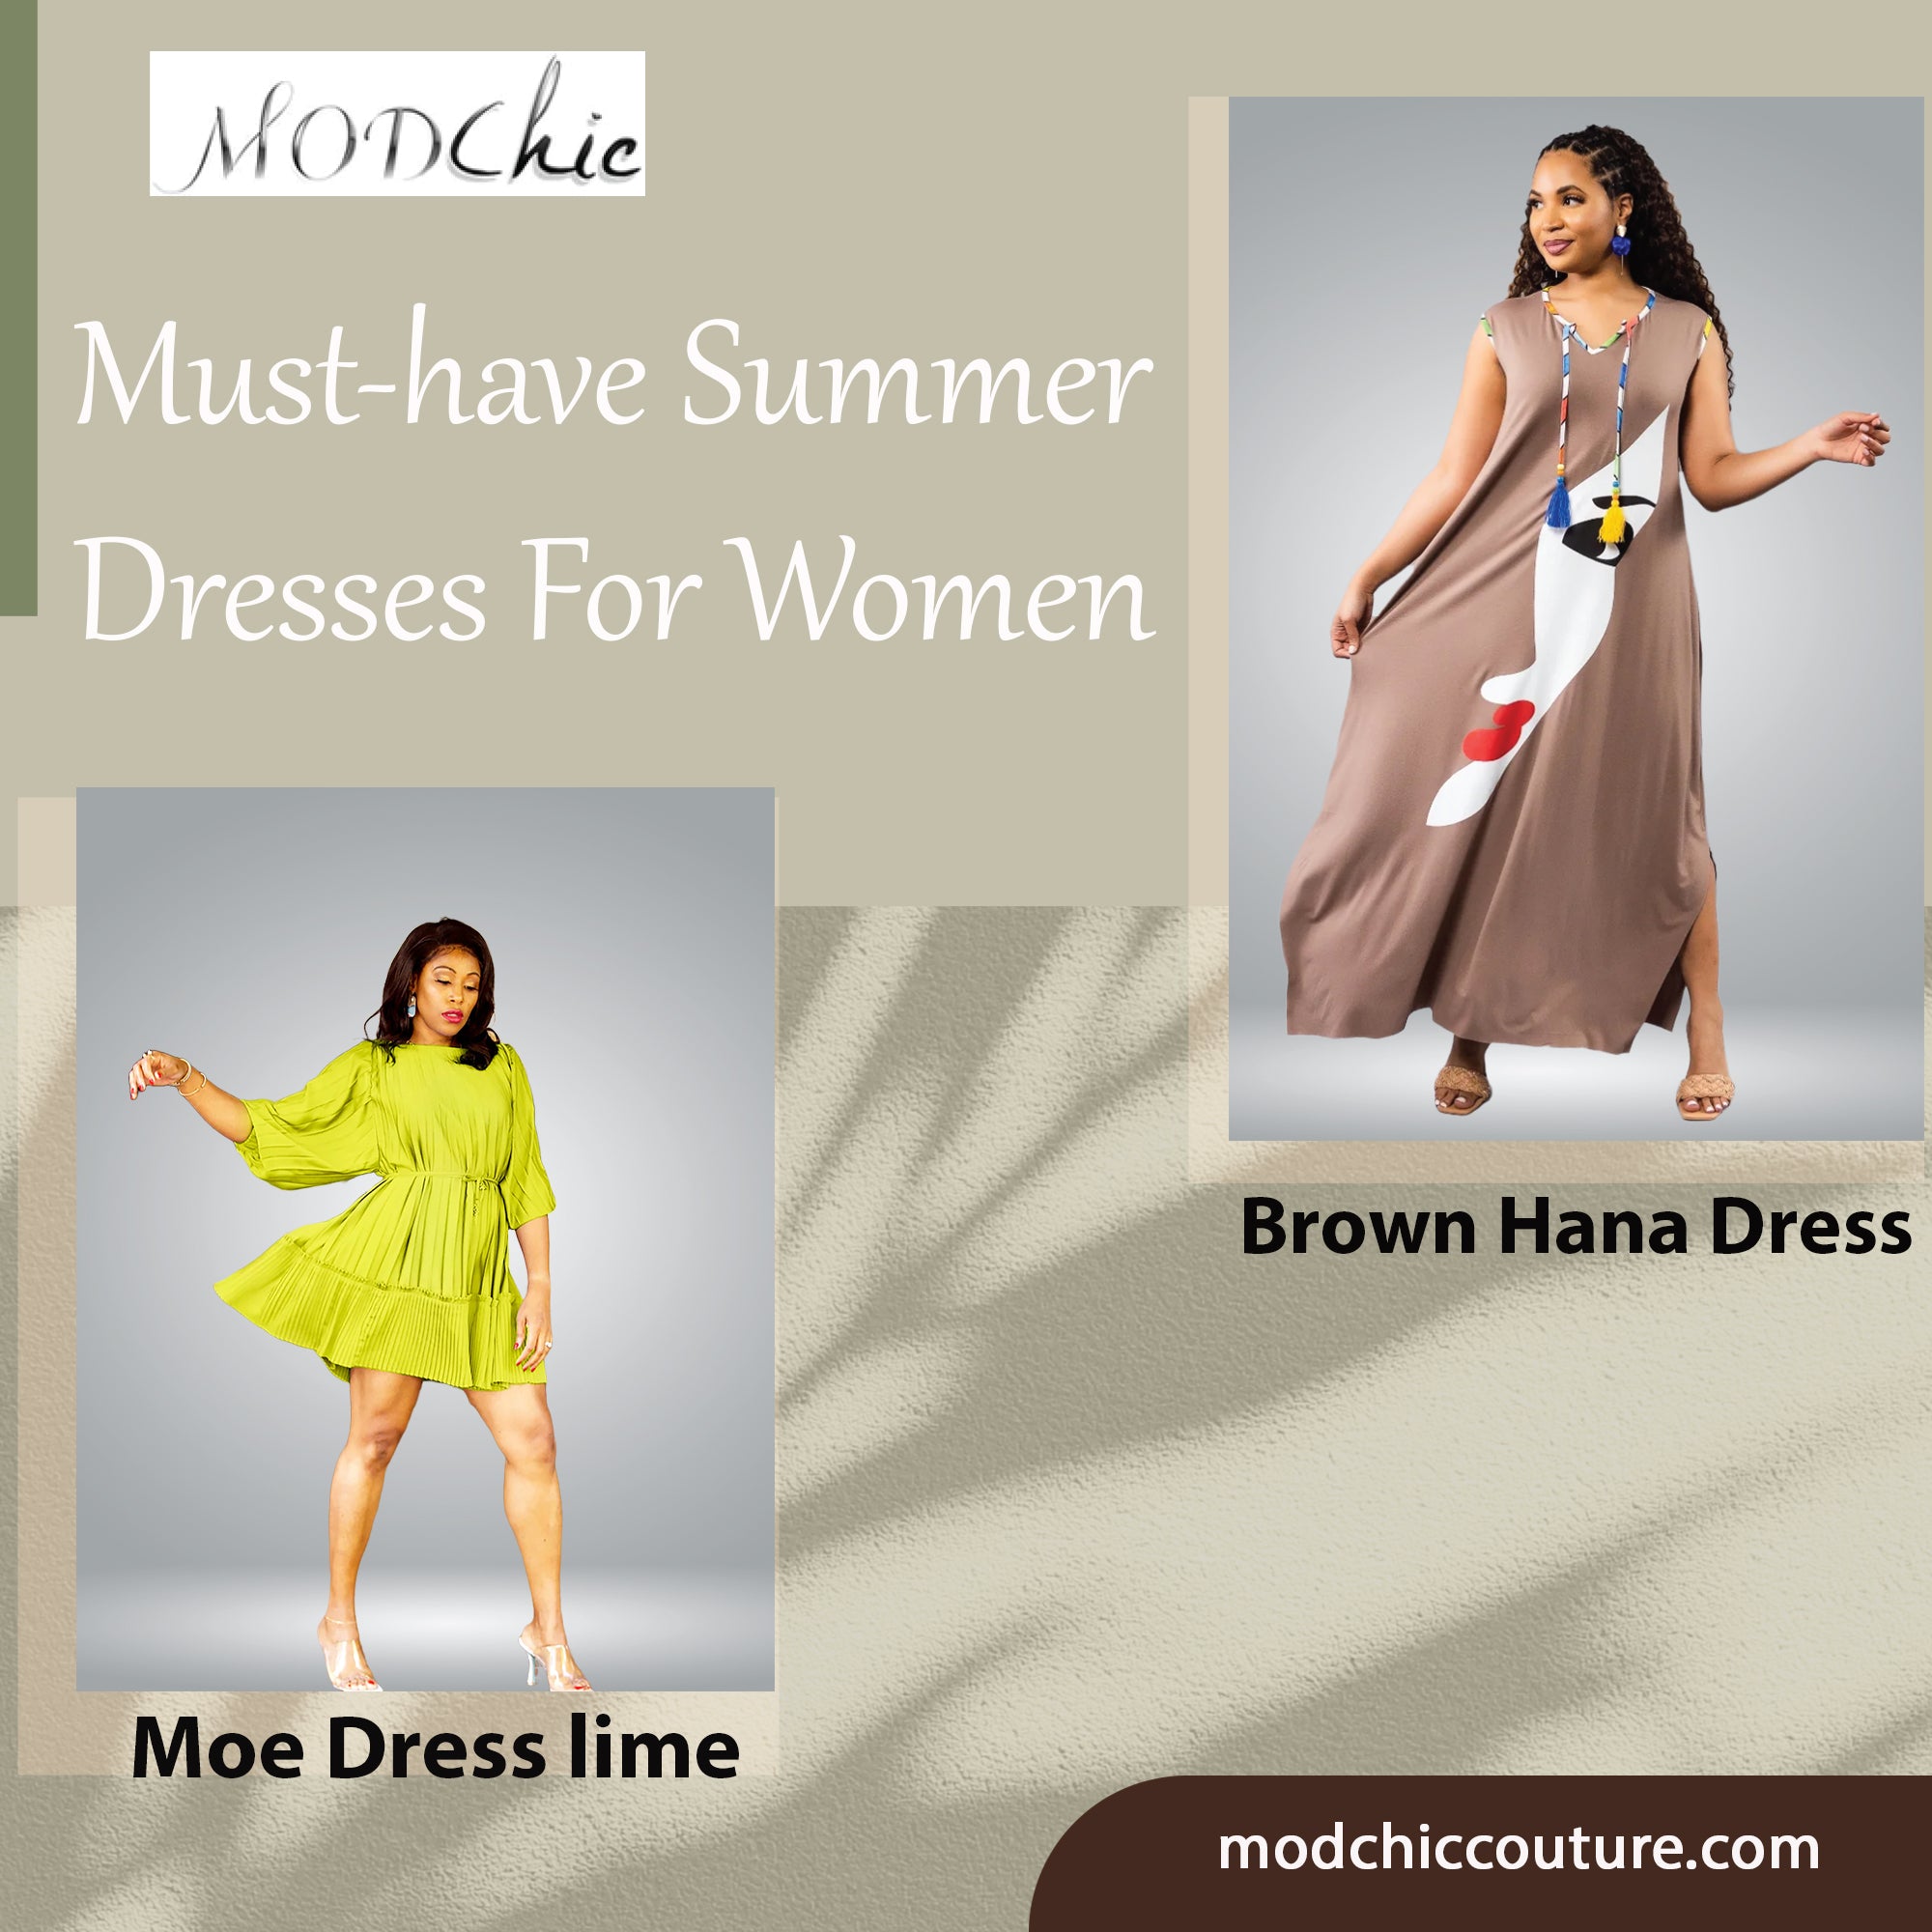 21 Summer Outfits 2020 For Women Over 30 - VivieHome